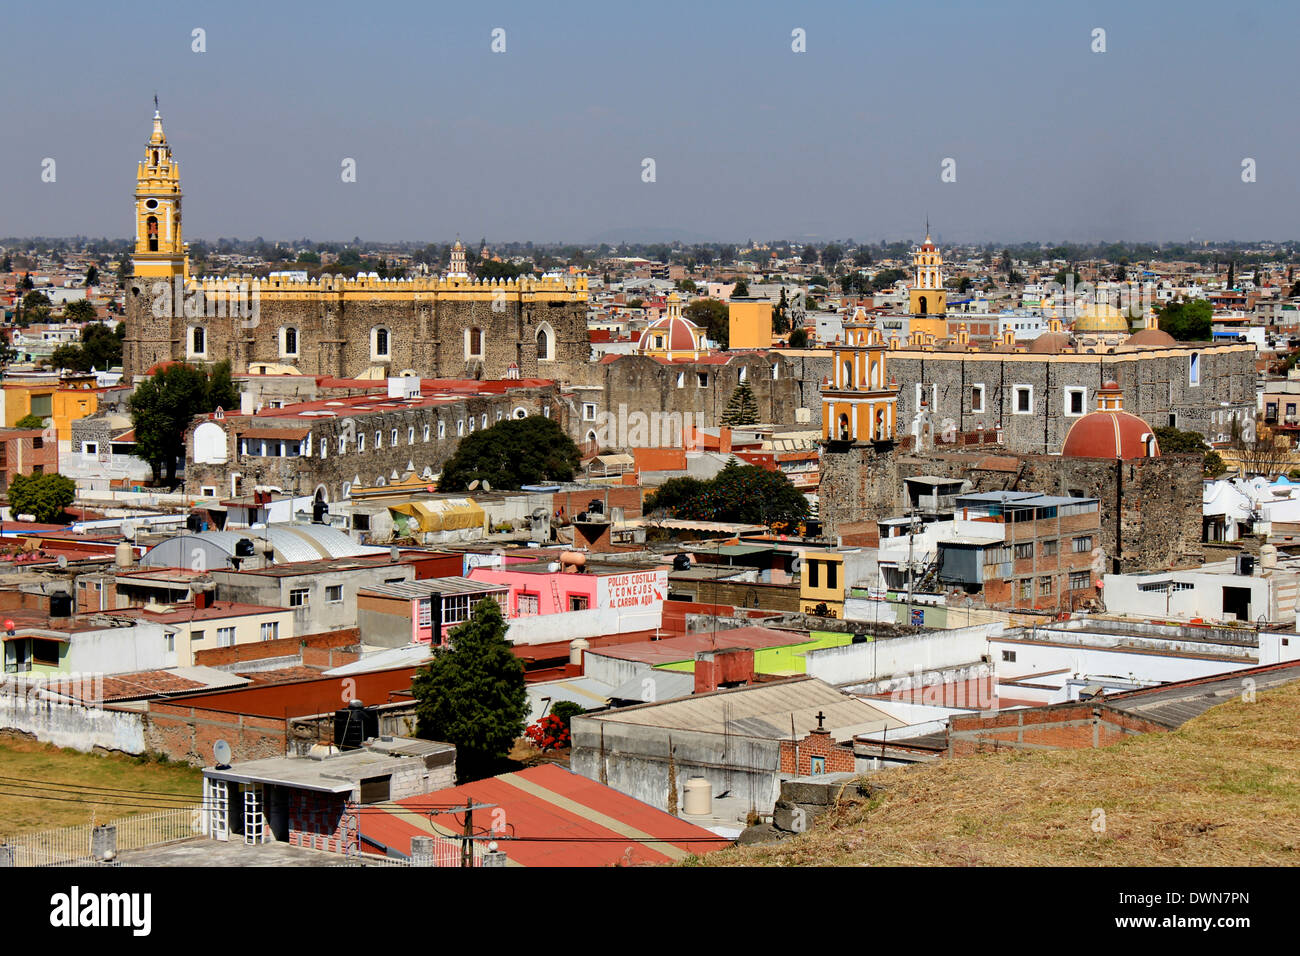 View of one of the many churches in Cholula, Puebla, Mexico Stock Photo